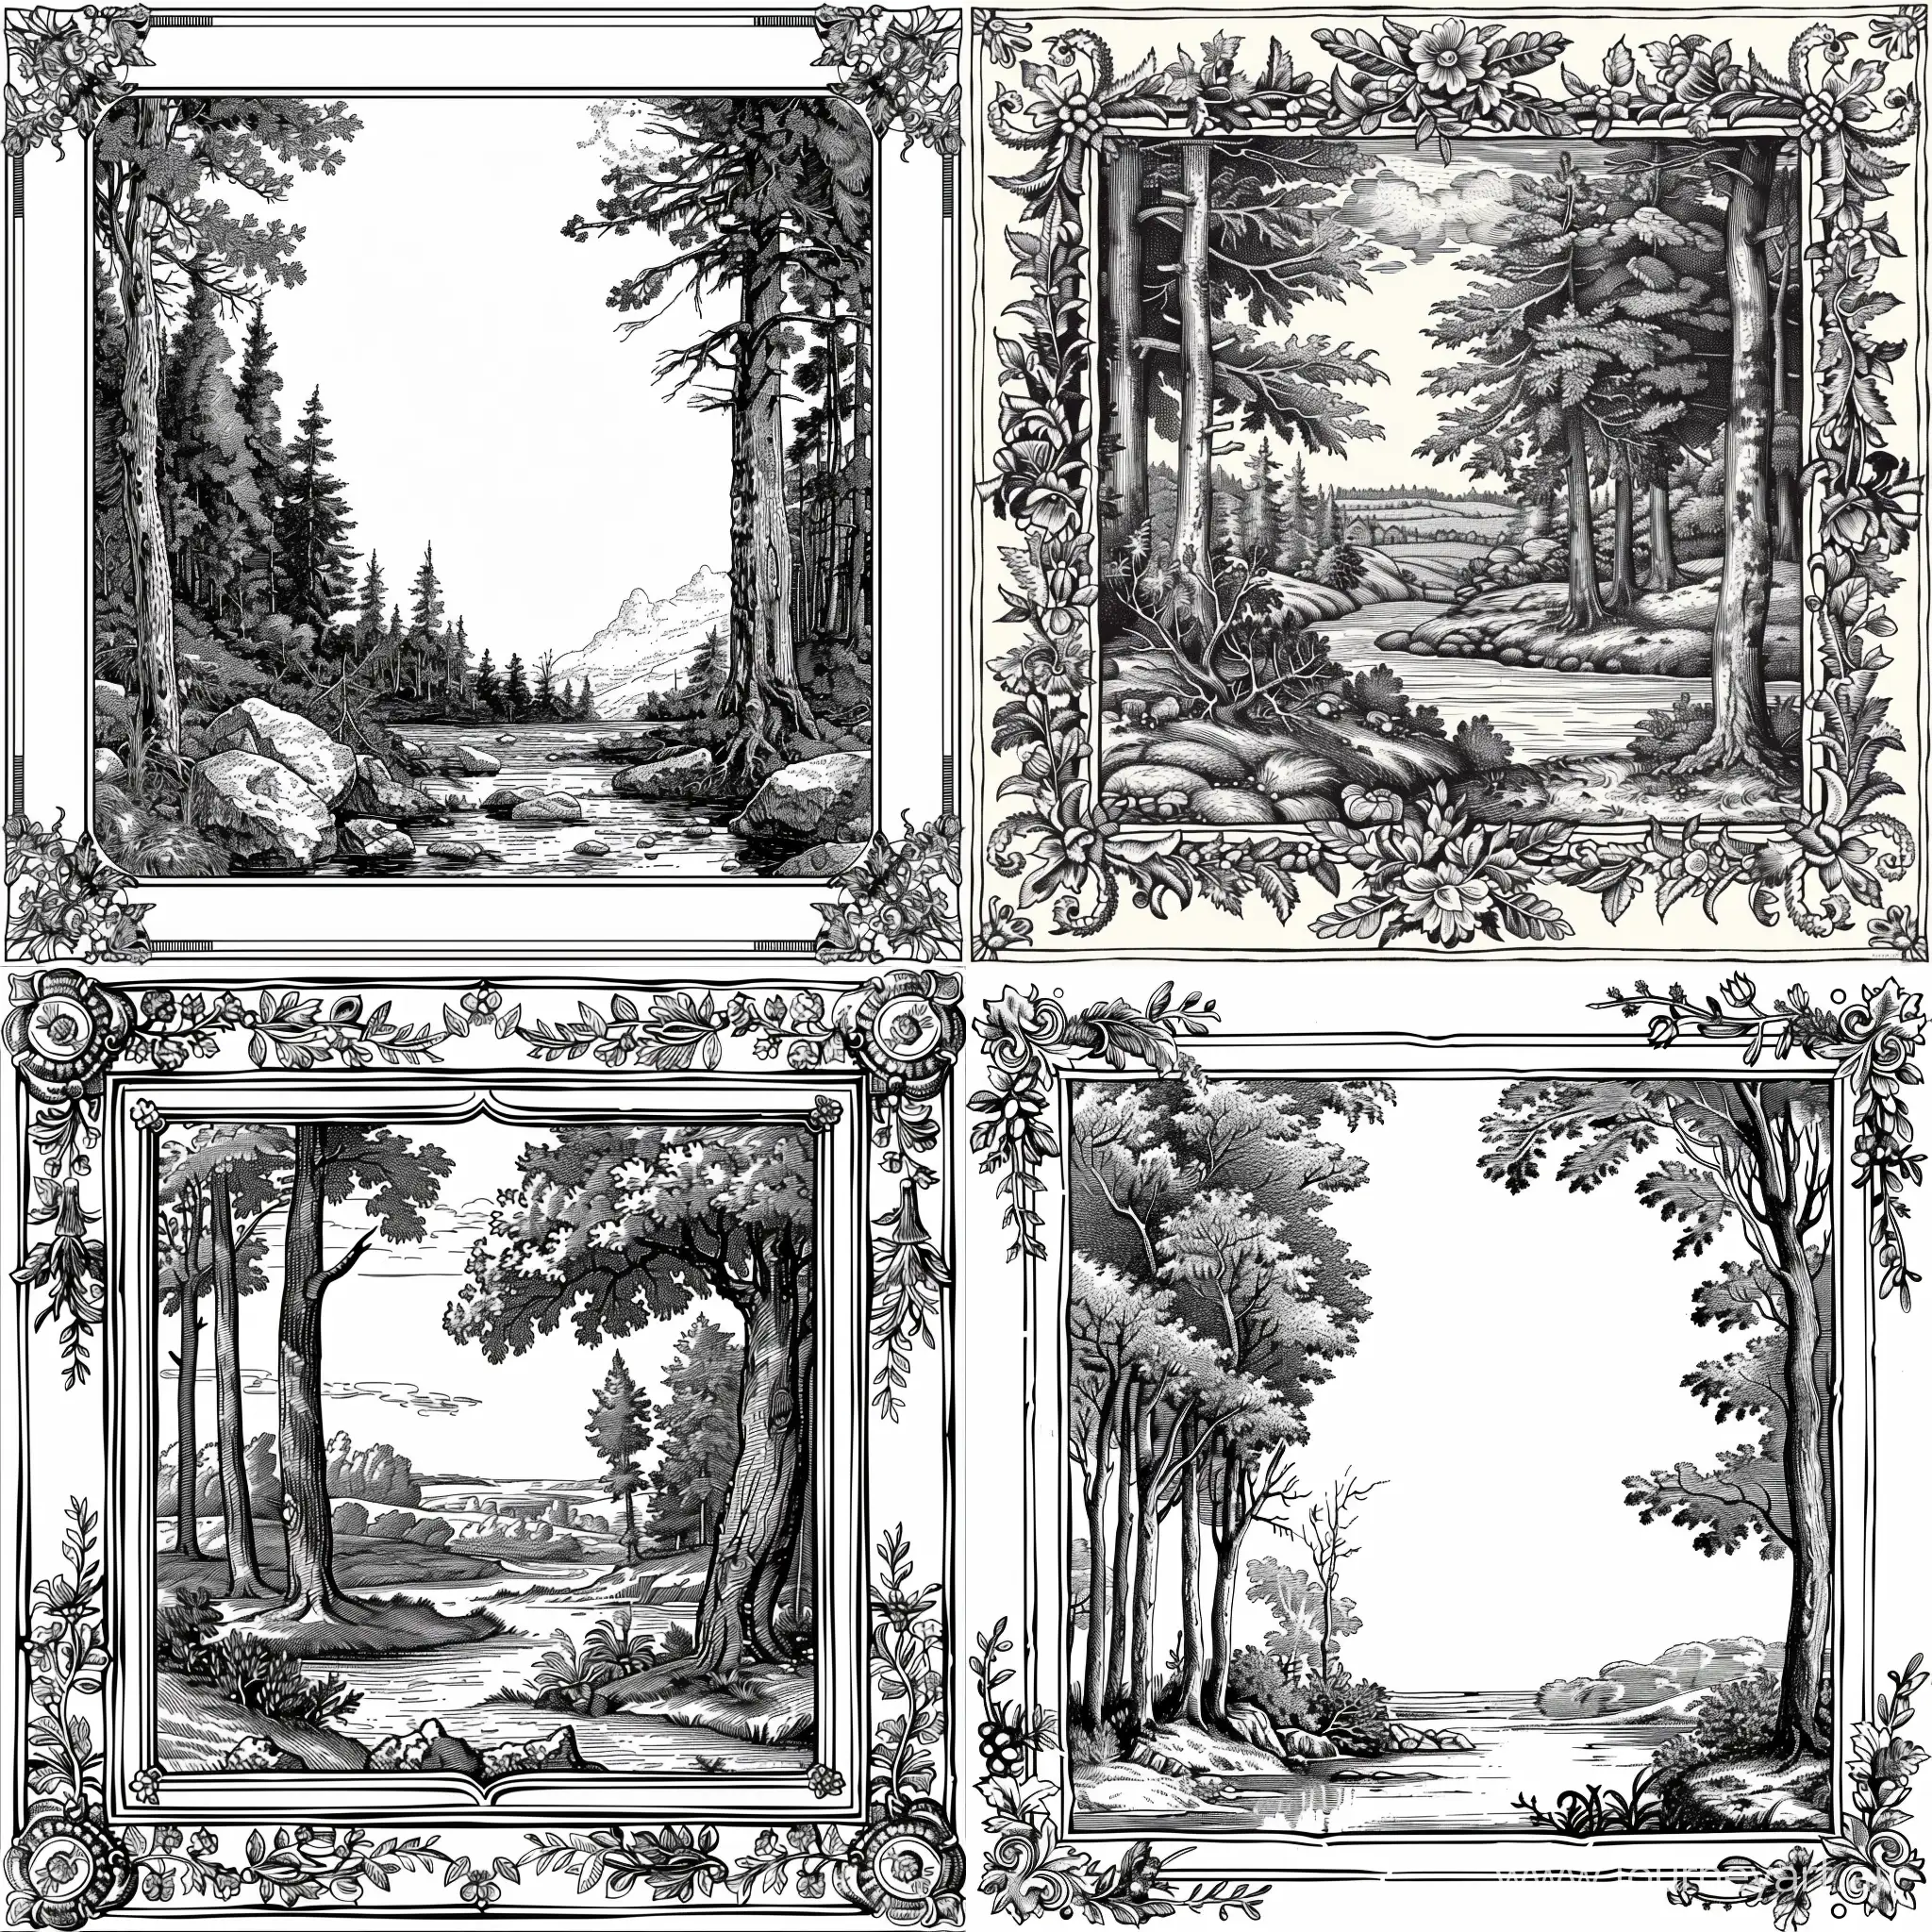 (Engraving Square Ornament Vectors), (square frame), forest, river, label design, high detail, many small ornament elements, black and white